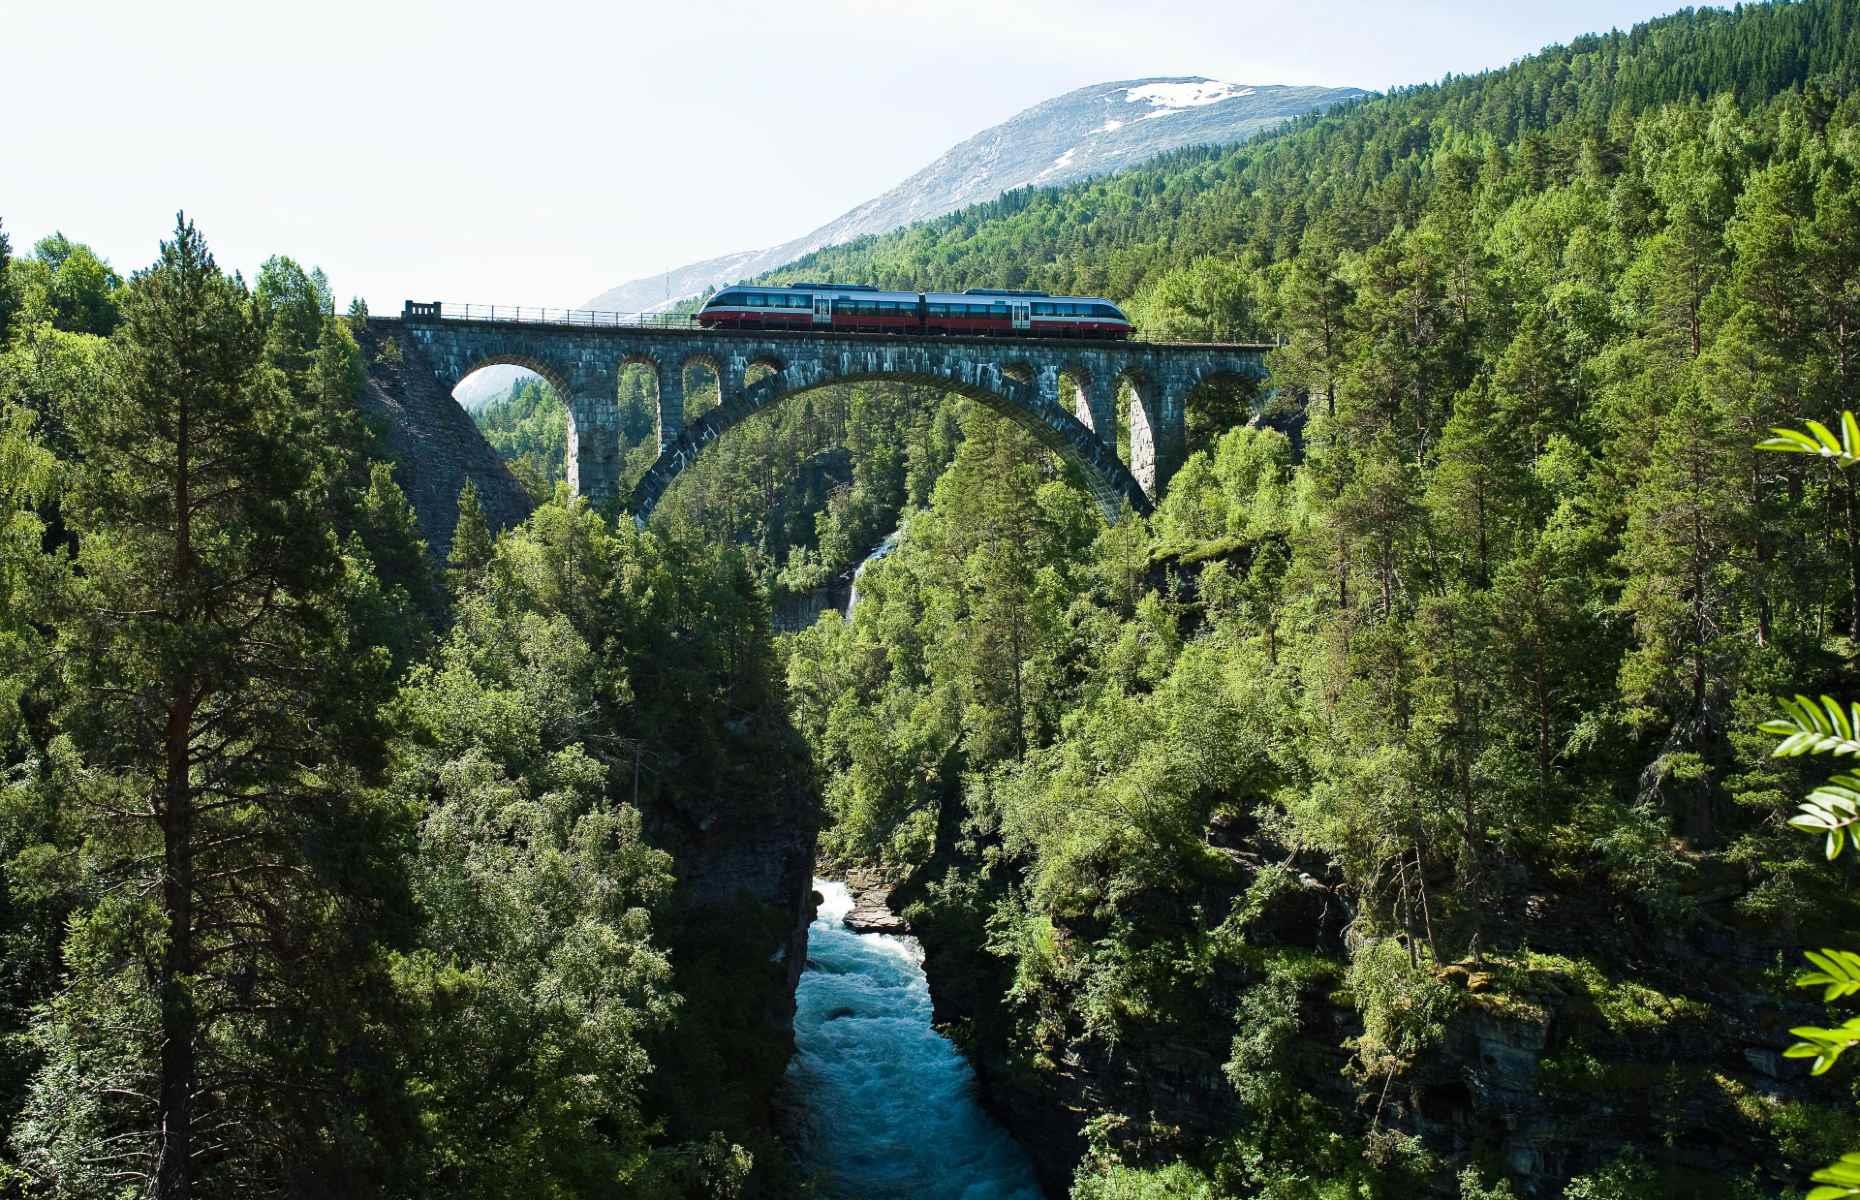 <p>Few places on Earth have as much dramatic scenery as Norway and the <a href="https://www.visitnorway.com/plan-your-trip/getting-around/by-train/rauma-line/">Rauma Line</a> is a great way to experience it. The one hour and 40-minute journey begins in the village of  Dombås, taking in the historic towns and mountain farms of the Gudbrandsdalen valley before entering the steep and rugged Romsdalen valley. It then passes over the famous Kylling Bridge and cruises past Trollveggen mountain before arriving at its final destination, Åndalsnes.</p>